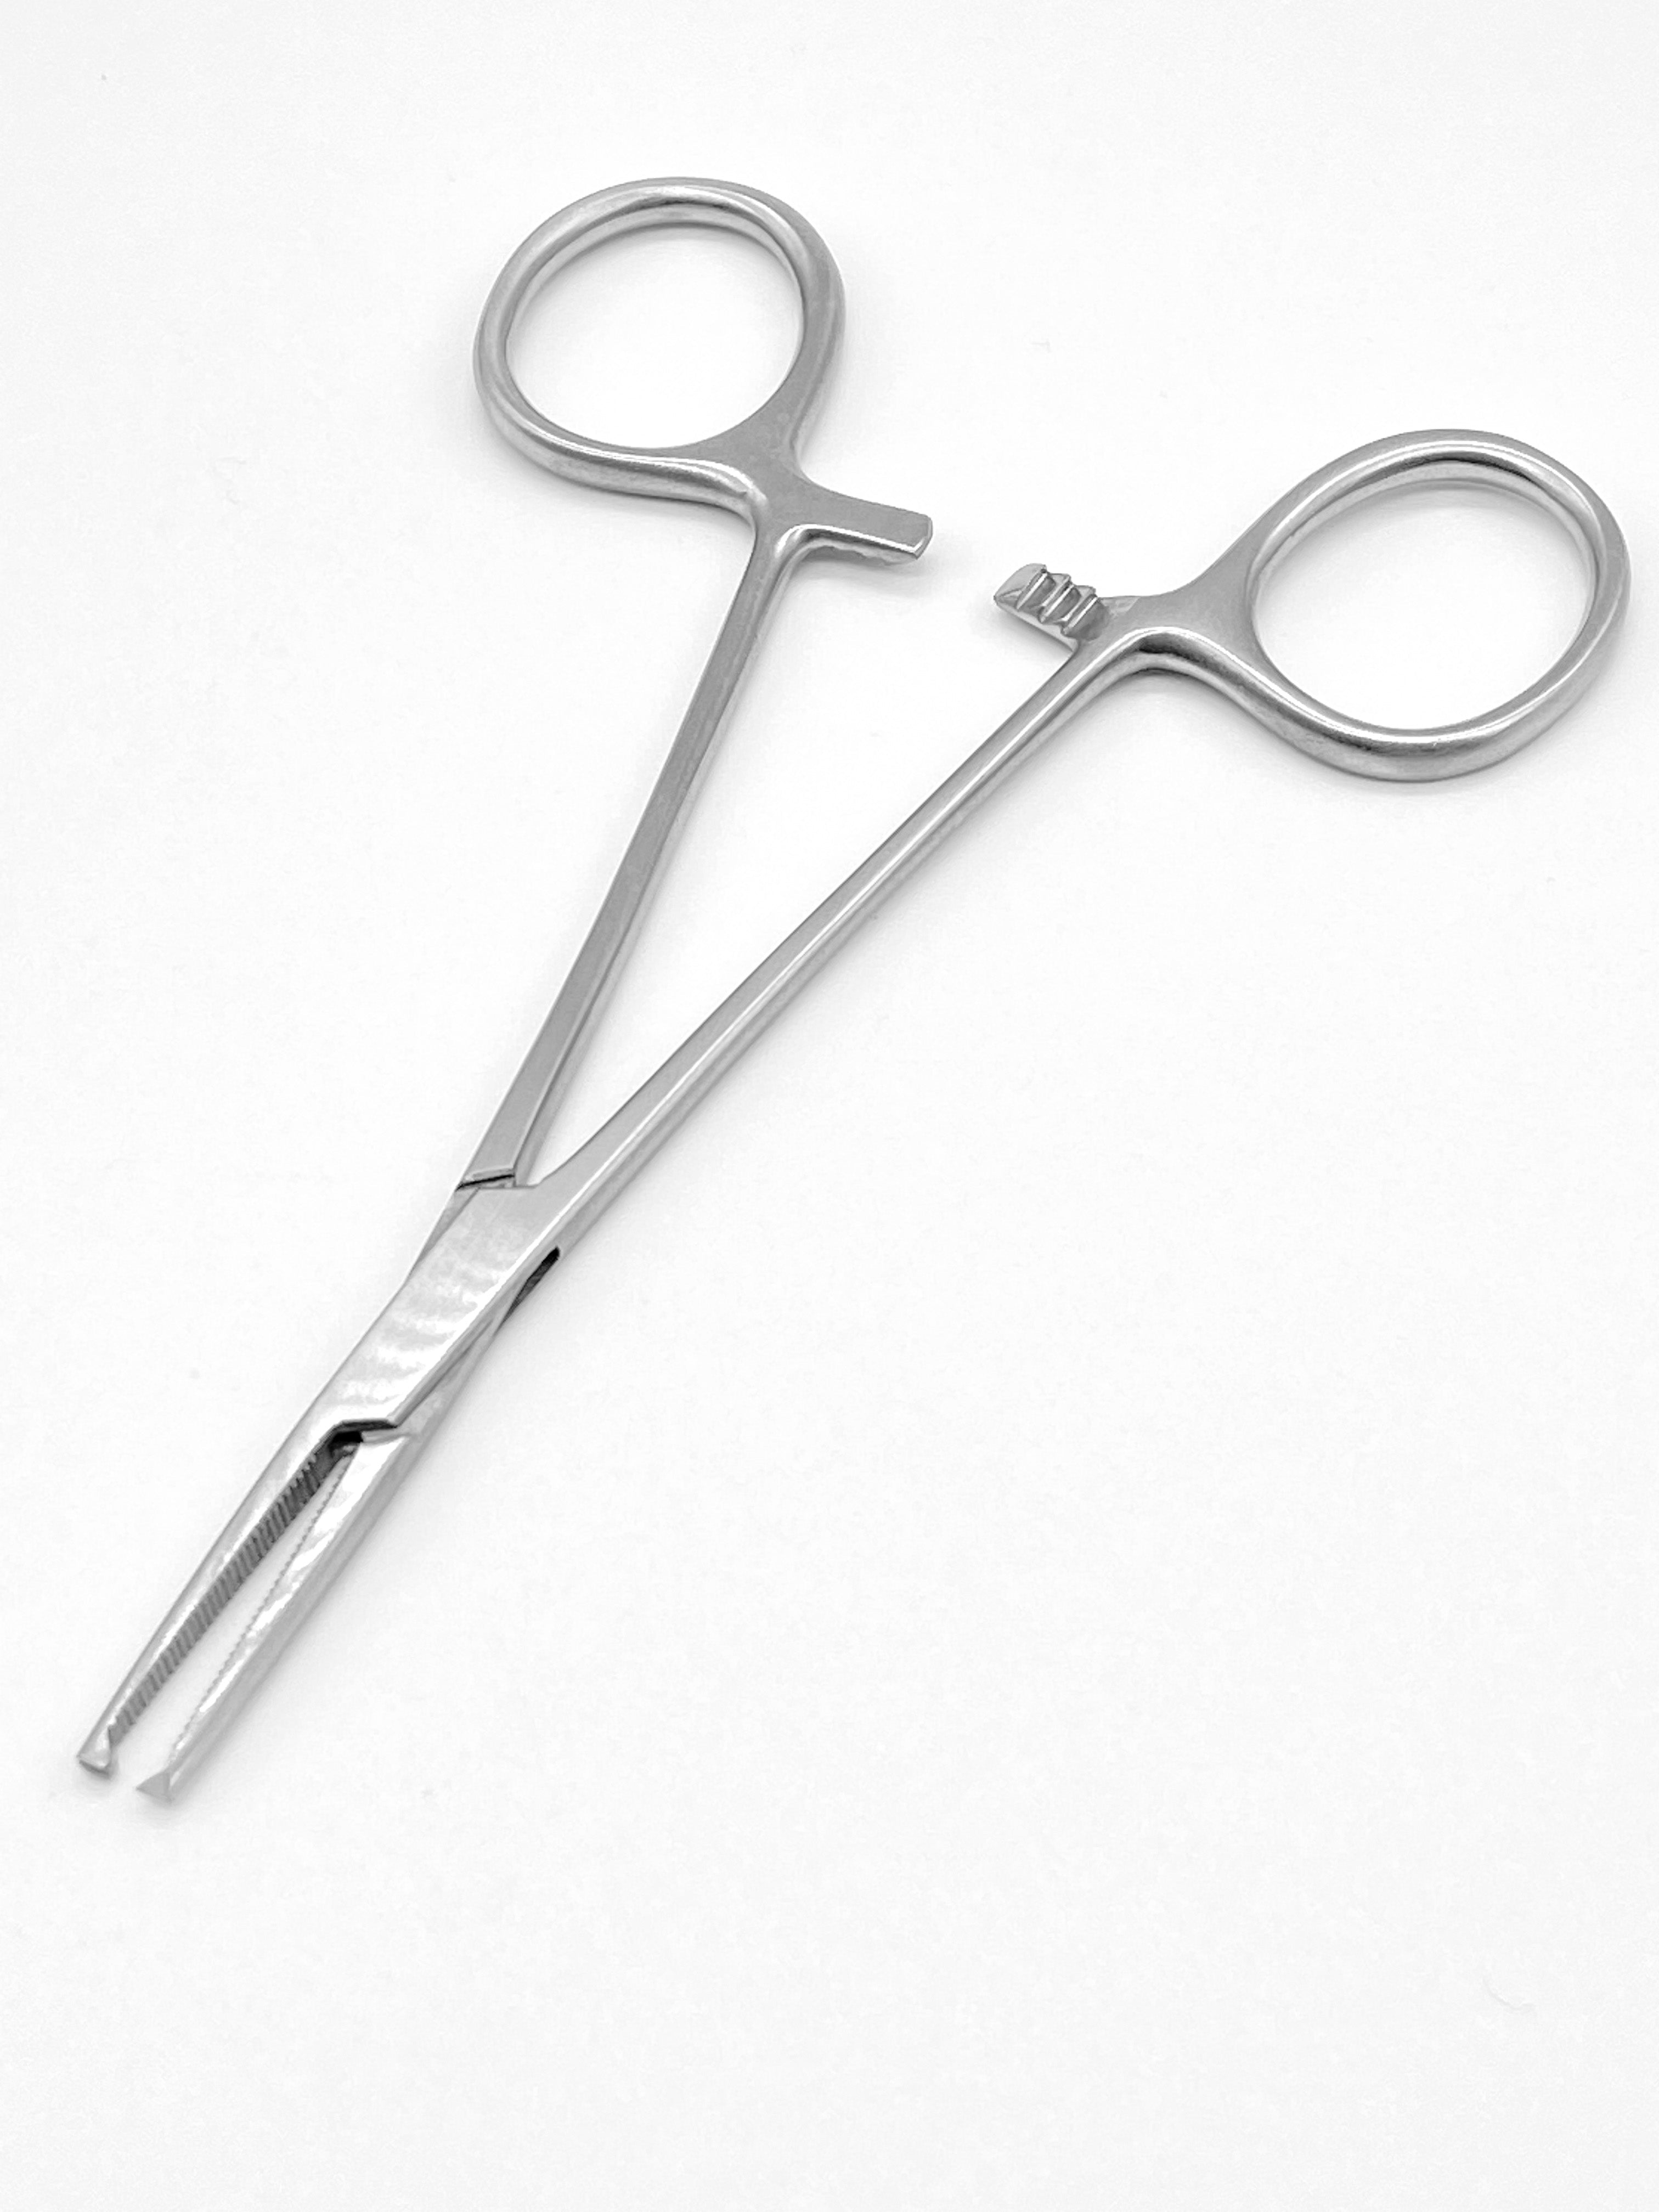 Artery Forceps - Kochers Forceps Straight/Curved 12cm Long - Surgical Podiatry Instruments